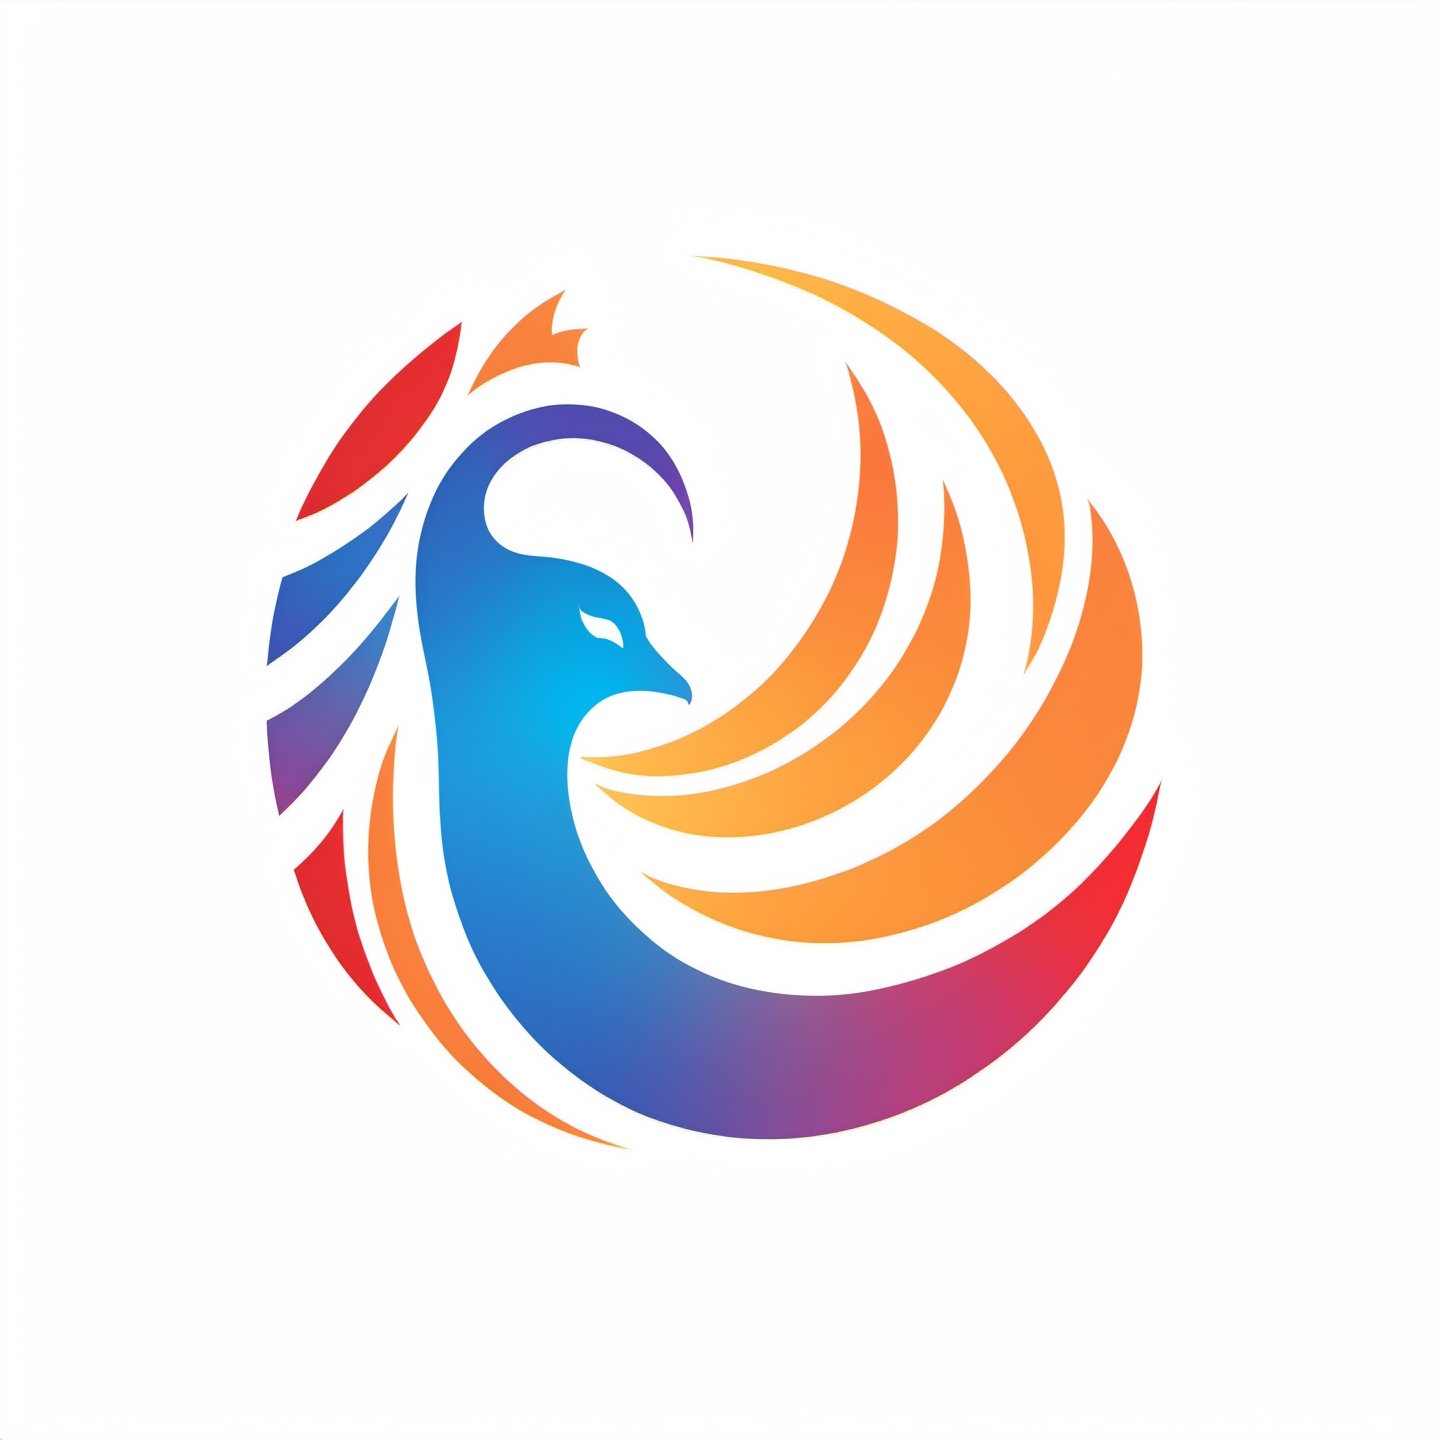 ((vector illustration, flat design)), (((logo phoenix with open wing, fire:1.2, facing right:1.4))), ((letter "SIS":1.3)) simple design elements, (((red & orange:1.4))), white background, high quality, ultra-detailed, professional, modern style, eye-catching emblem, creative composition, sharp lines and shapes, stylish and clean, appealing to the eye, striking visual impact, playful and dynamic, crisp and vibrant colors, vivid color scheme, attractive contrast, bold and minimalistic, artistic flair, lively and energetic feel, catchy and memorable design, versatile and scalable graphics, modern and trendy aesthetic, fluid and smooth curves, professional and polished finish, artistic elegance, unique and original concept, vector art illustration